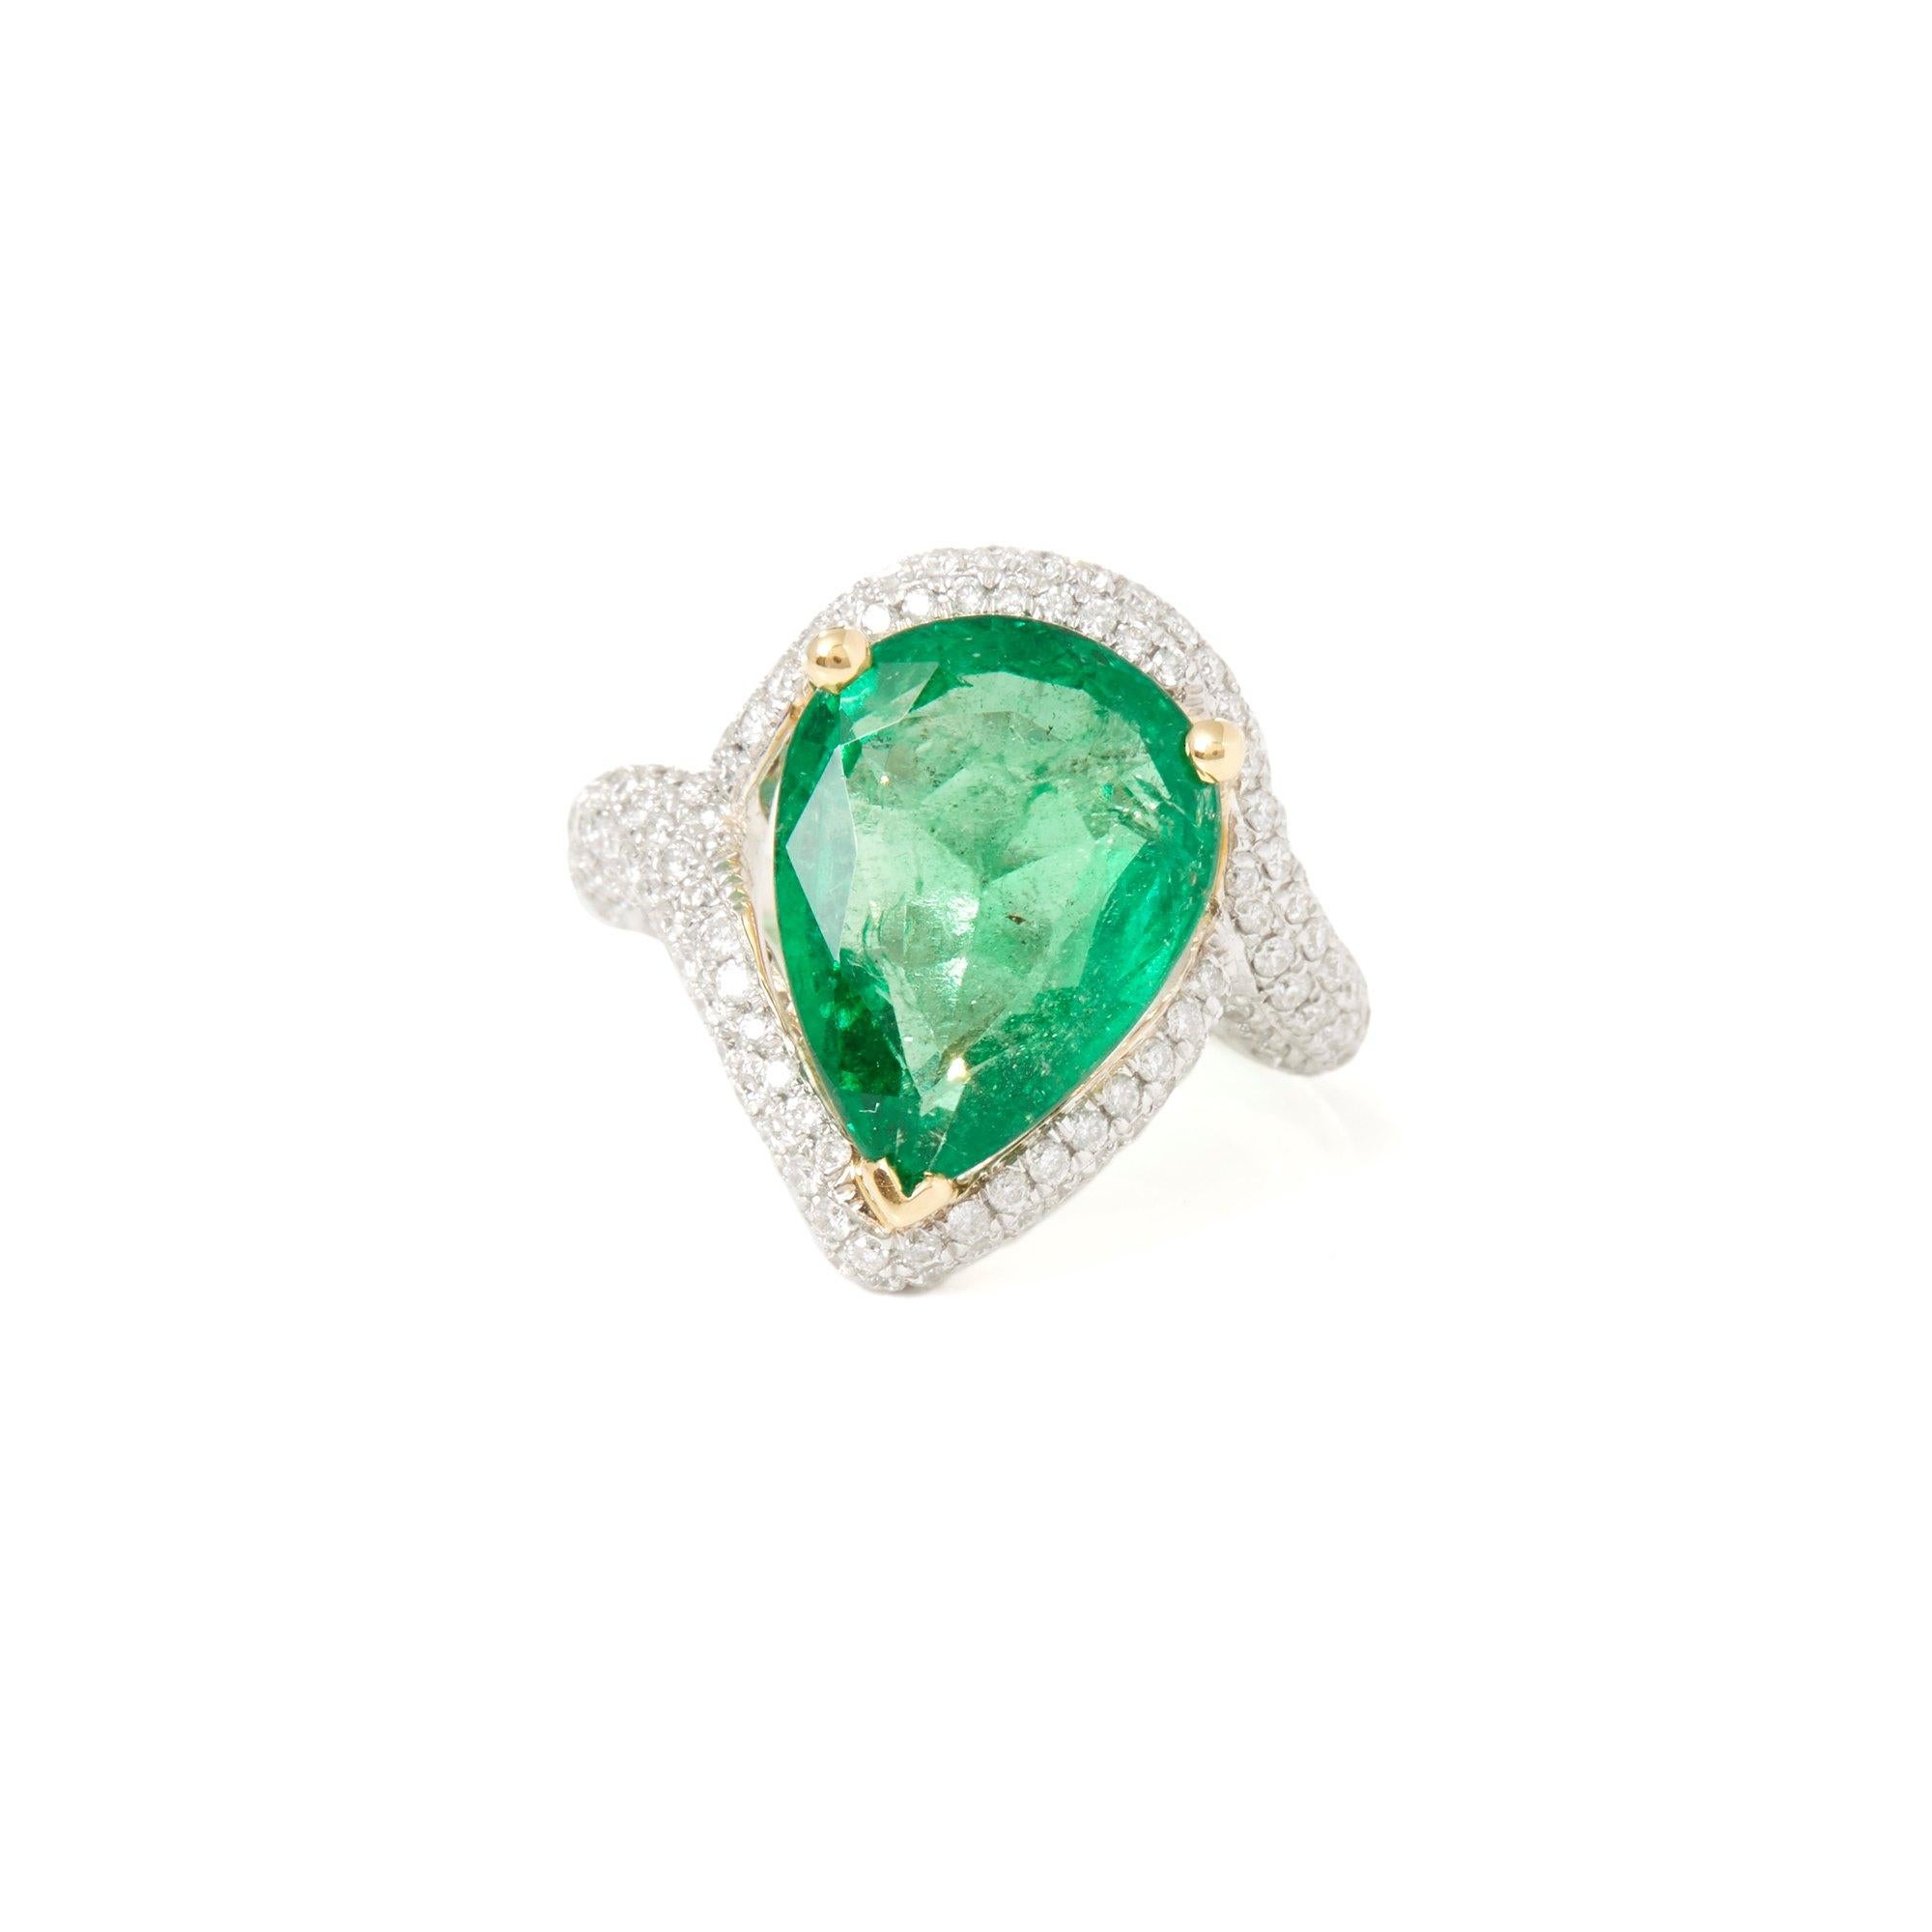 This ring designed by David Jerome is from his private collection and features one pear cut Emerald totalling 7.04cts sourced in the chivor mine in Columbia. Set with round brilliant cut Diamonds totalling 1.10cts mounted in an 18k white gold